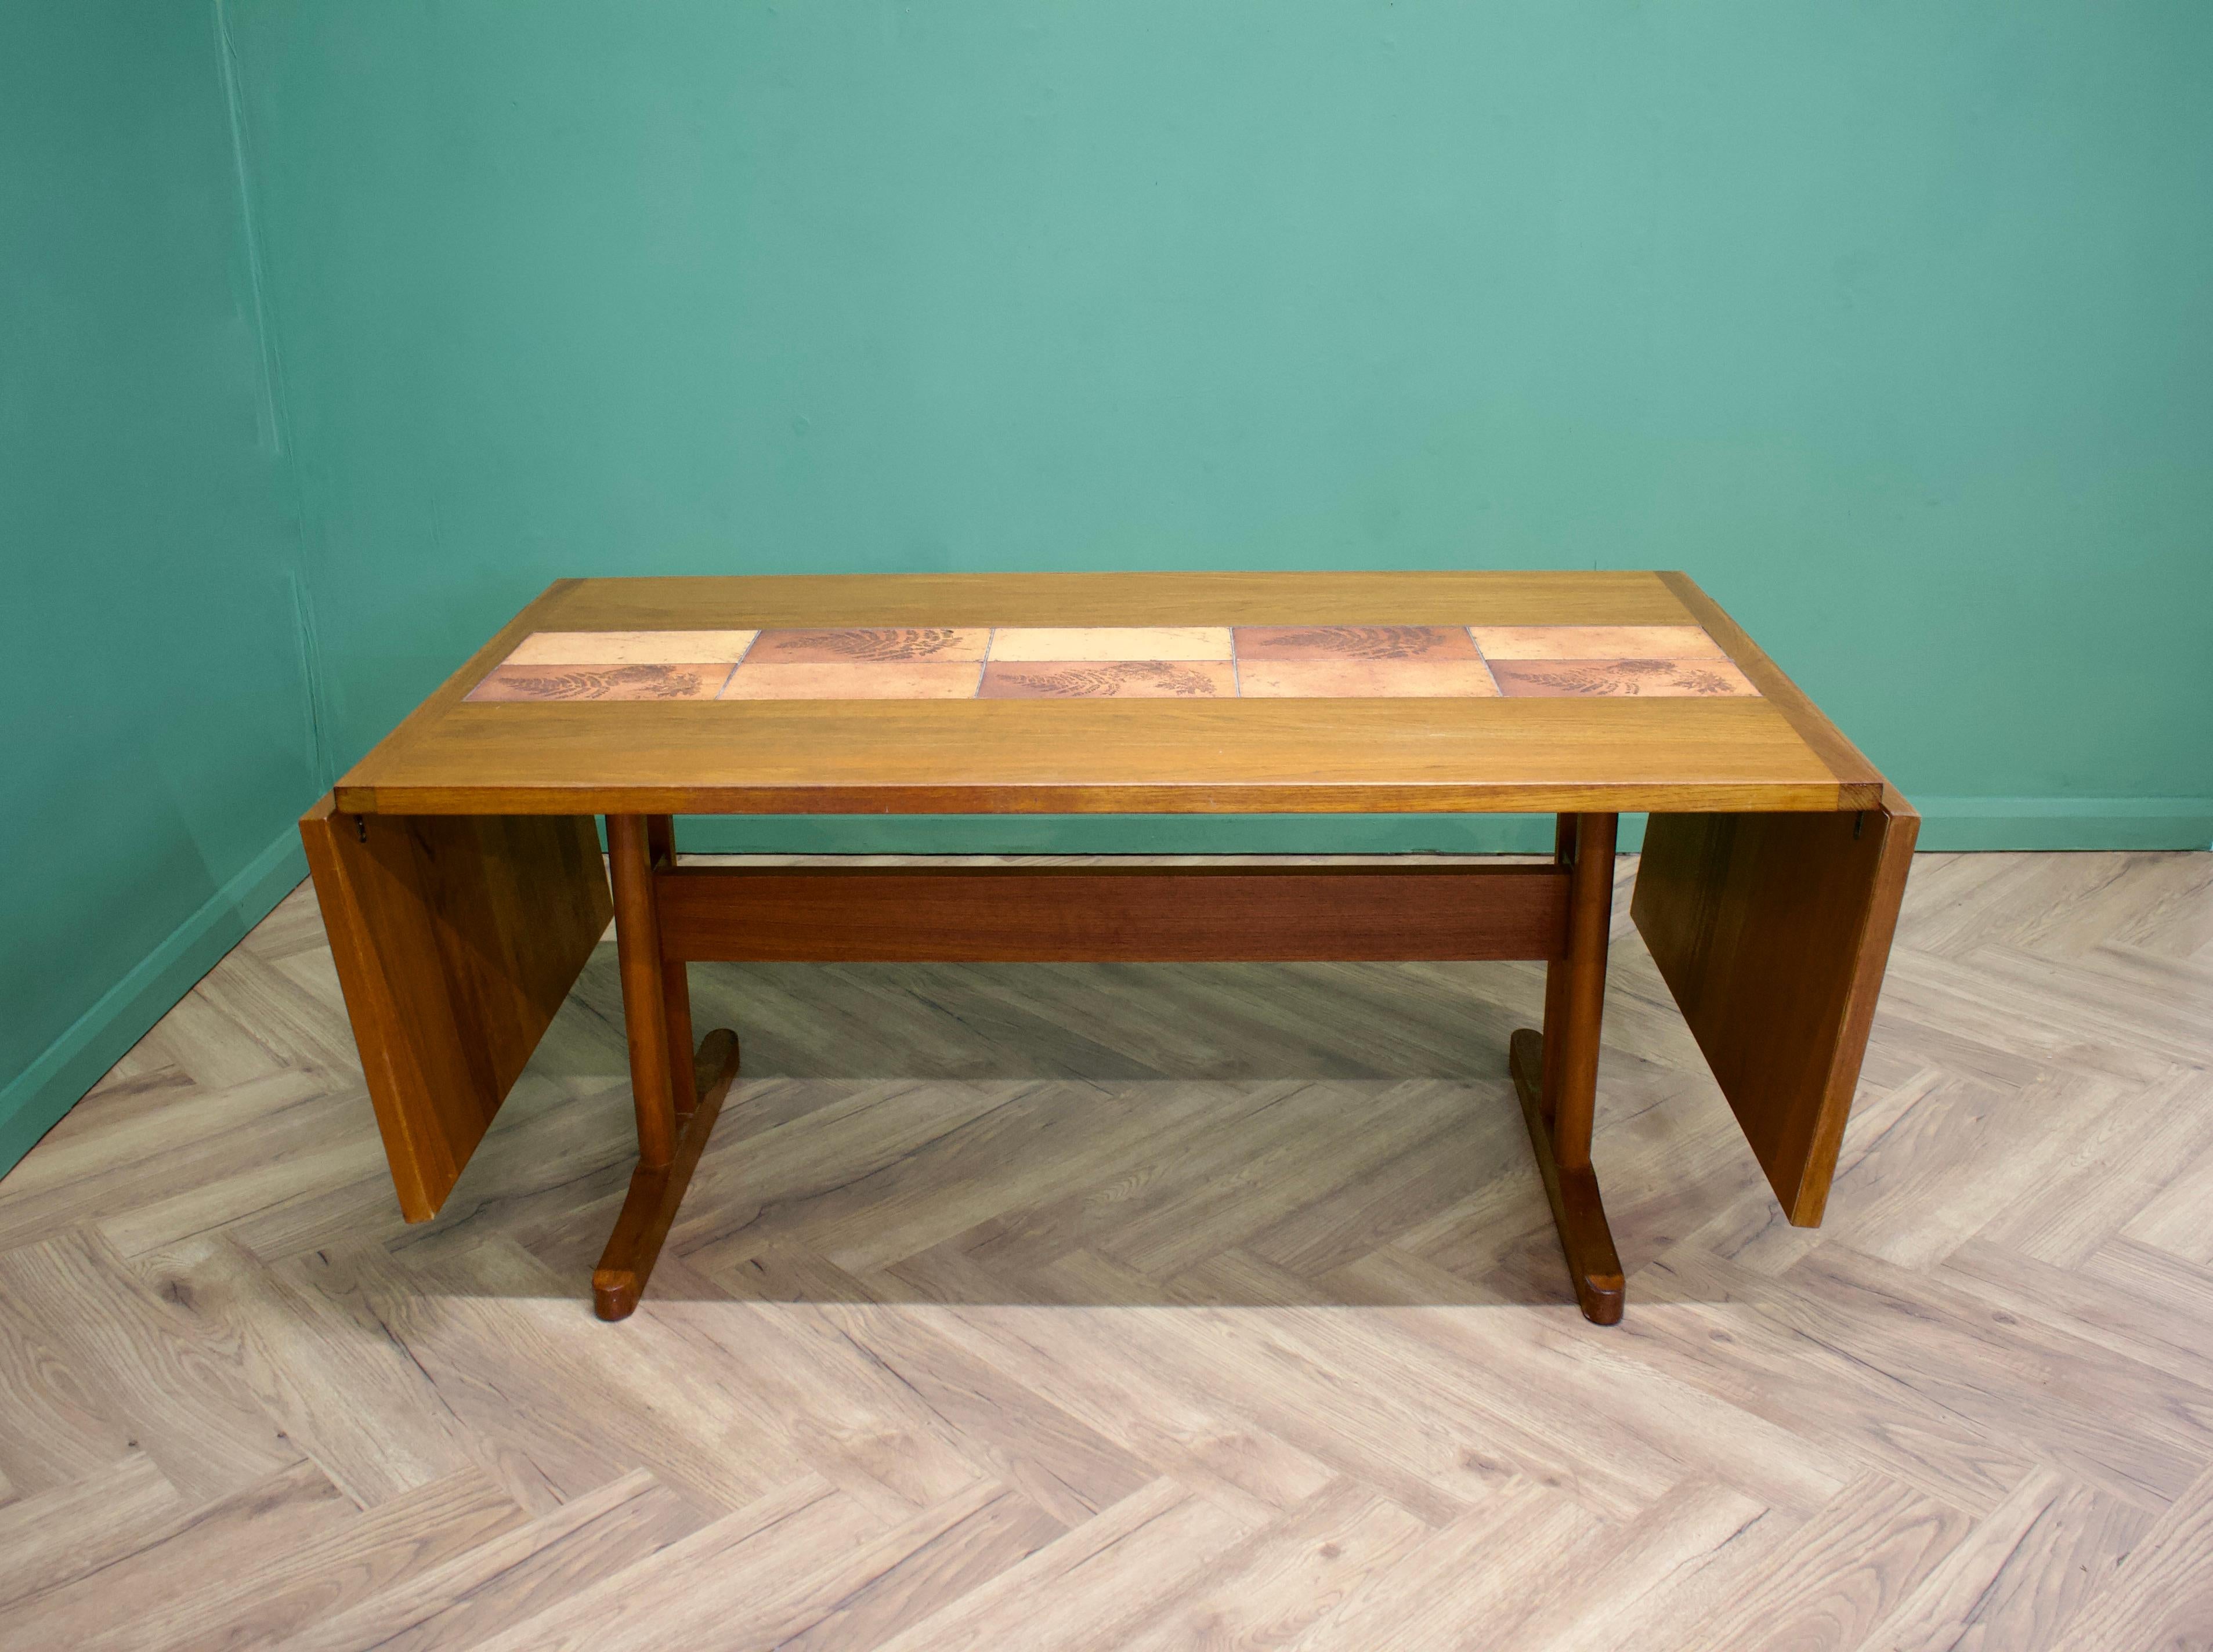 20th Century Mid-Century Teak Tiled Extendable Dining Table & Chairs by Ansager Mobler, 1970s